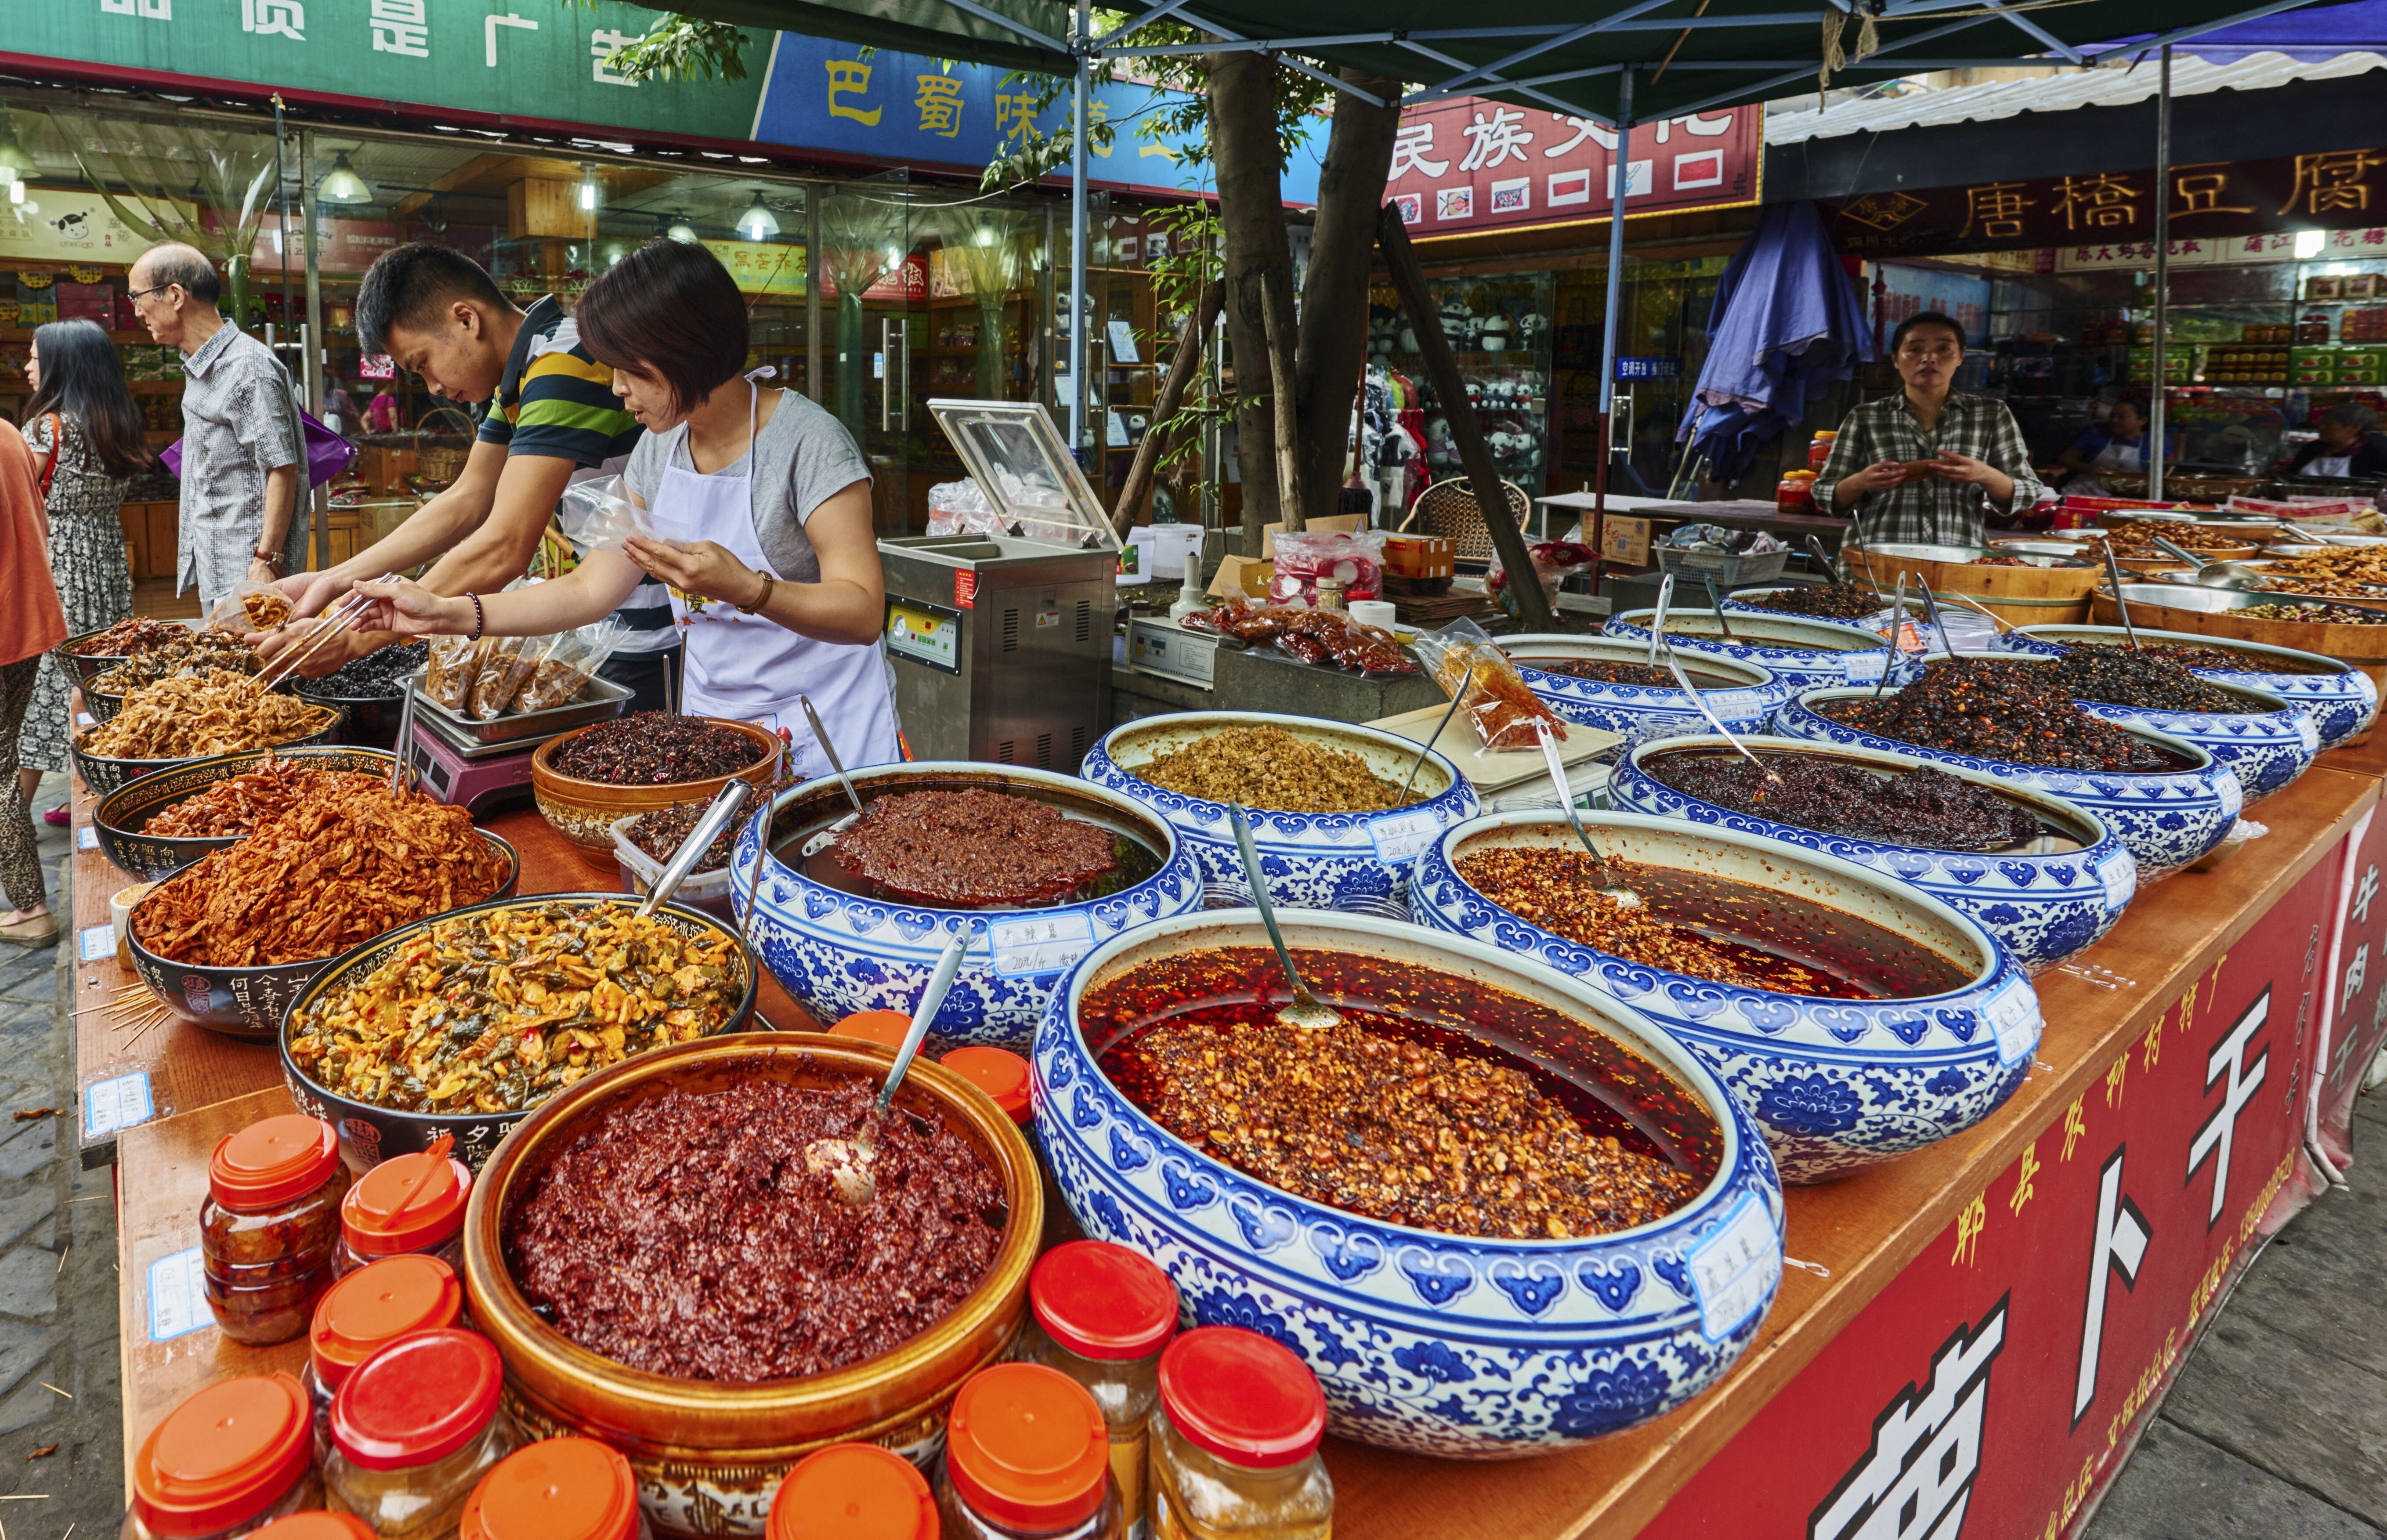 Sichuan cuisine is known for being spicy and numbing, but it is more complex. Photo: Alamy